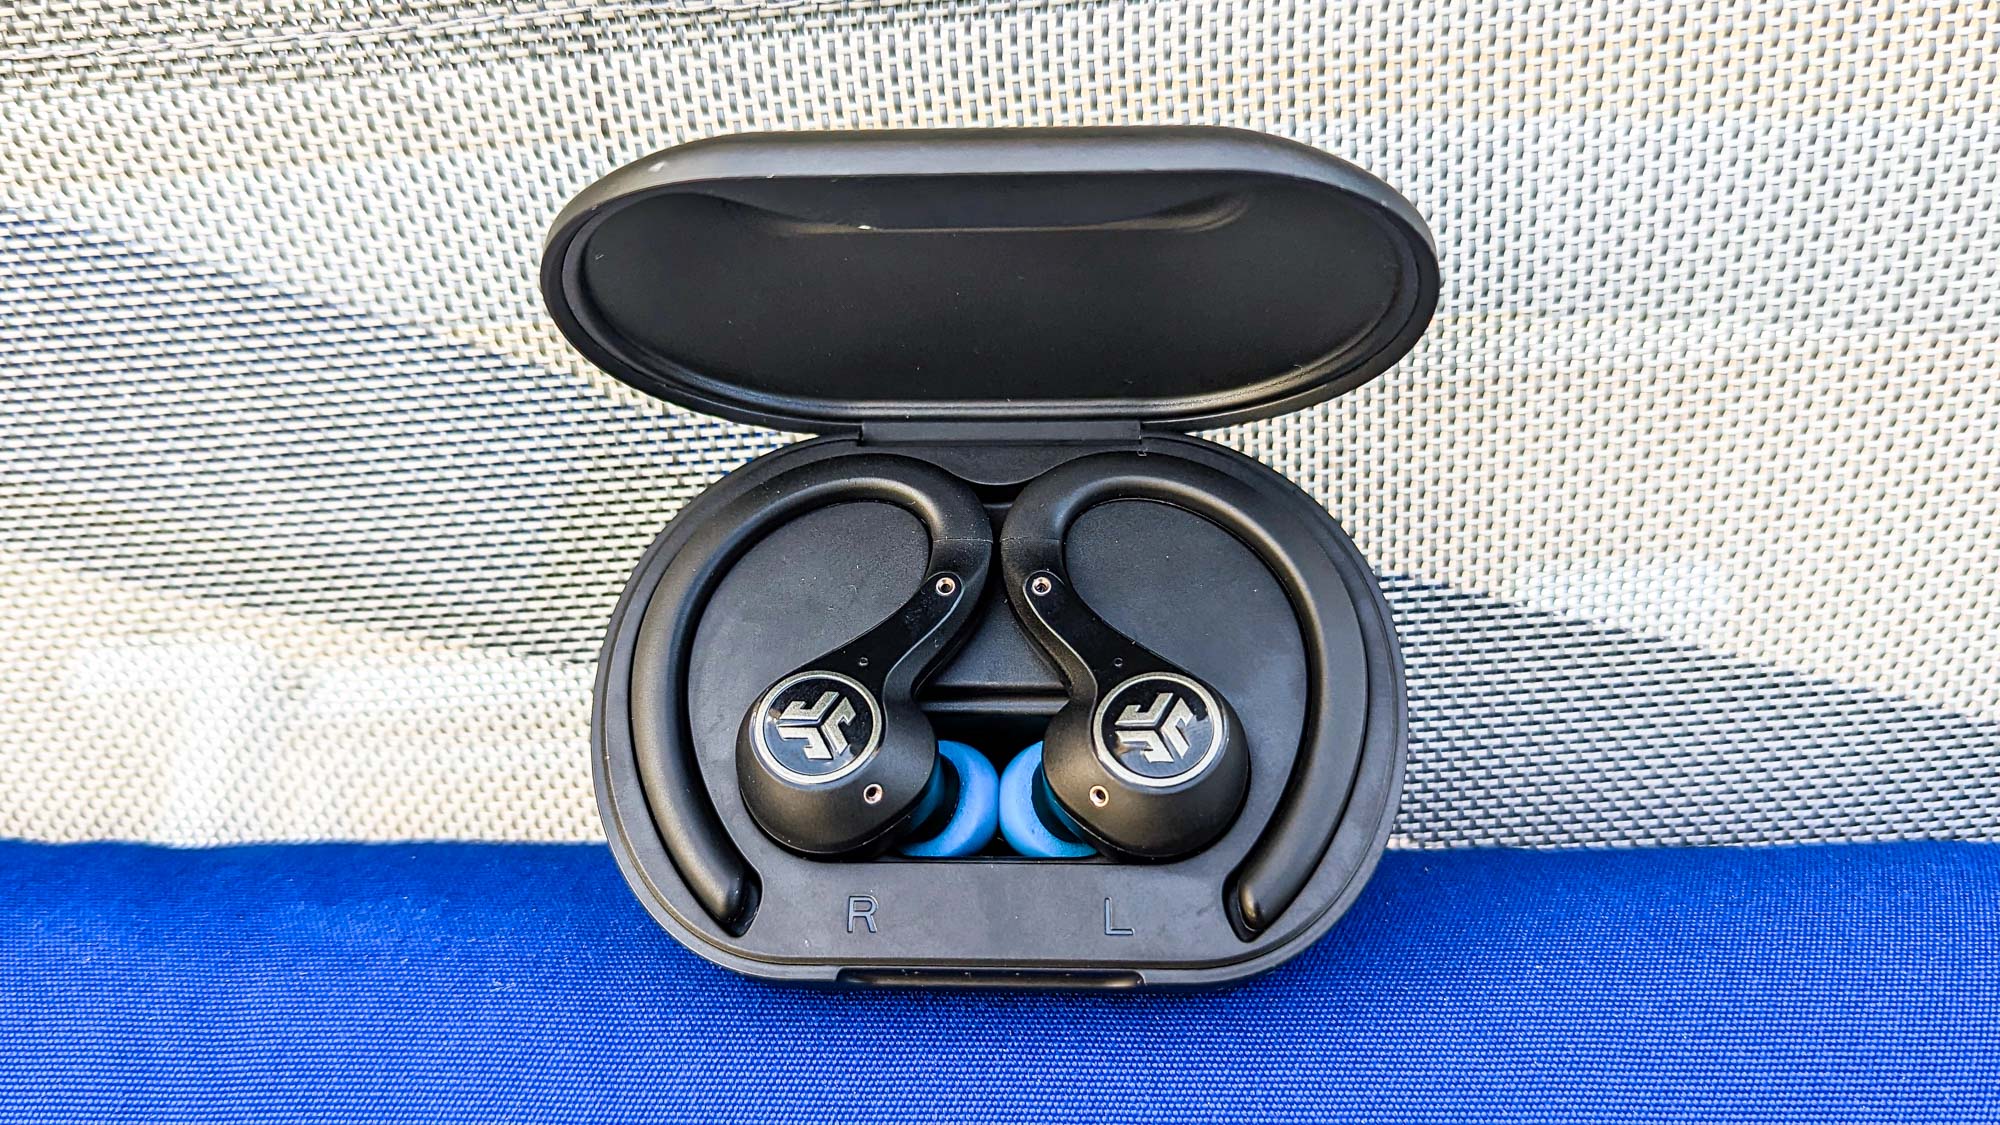 JLab Epic Air ANC 2 headphones in charging case on a cloth background